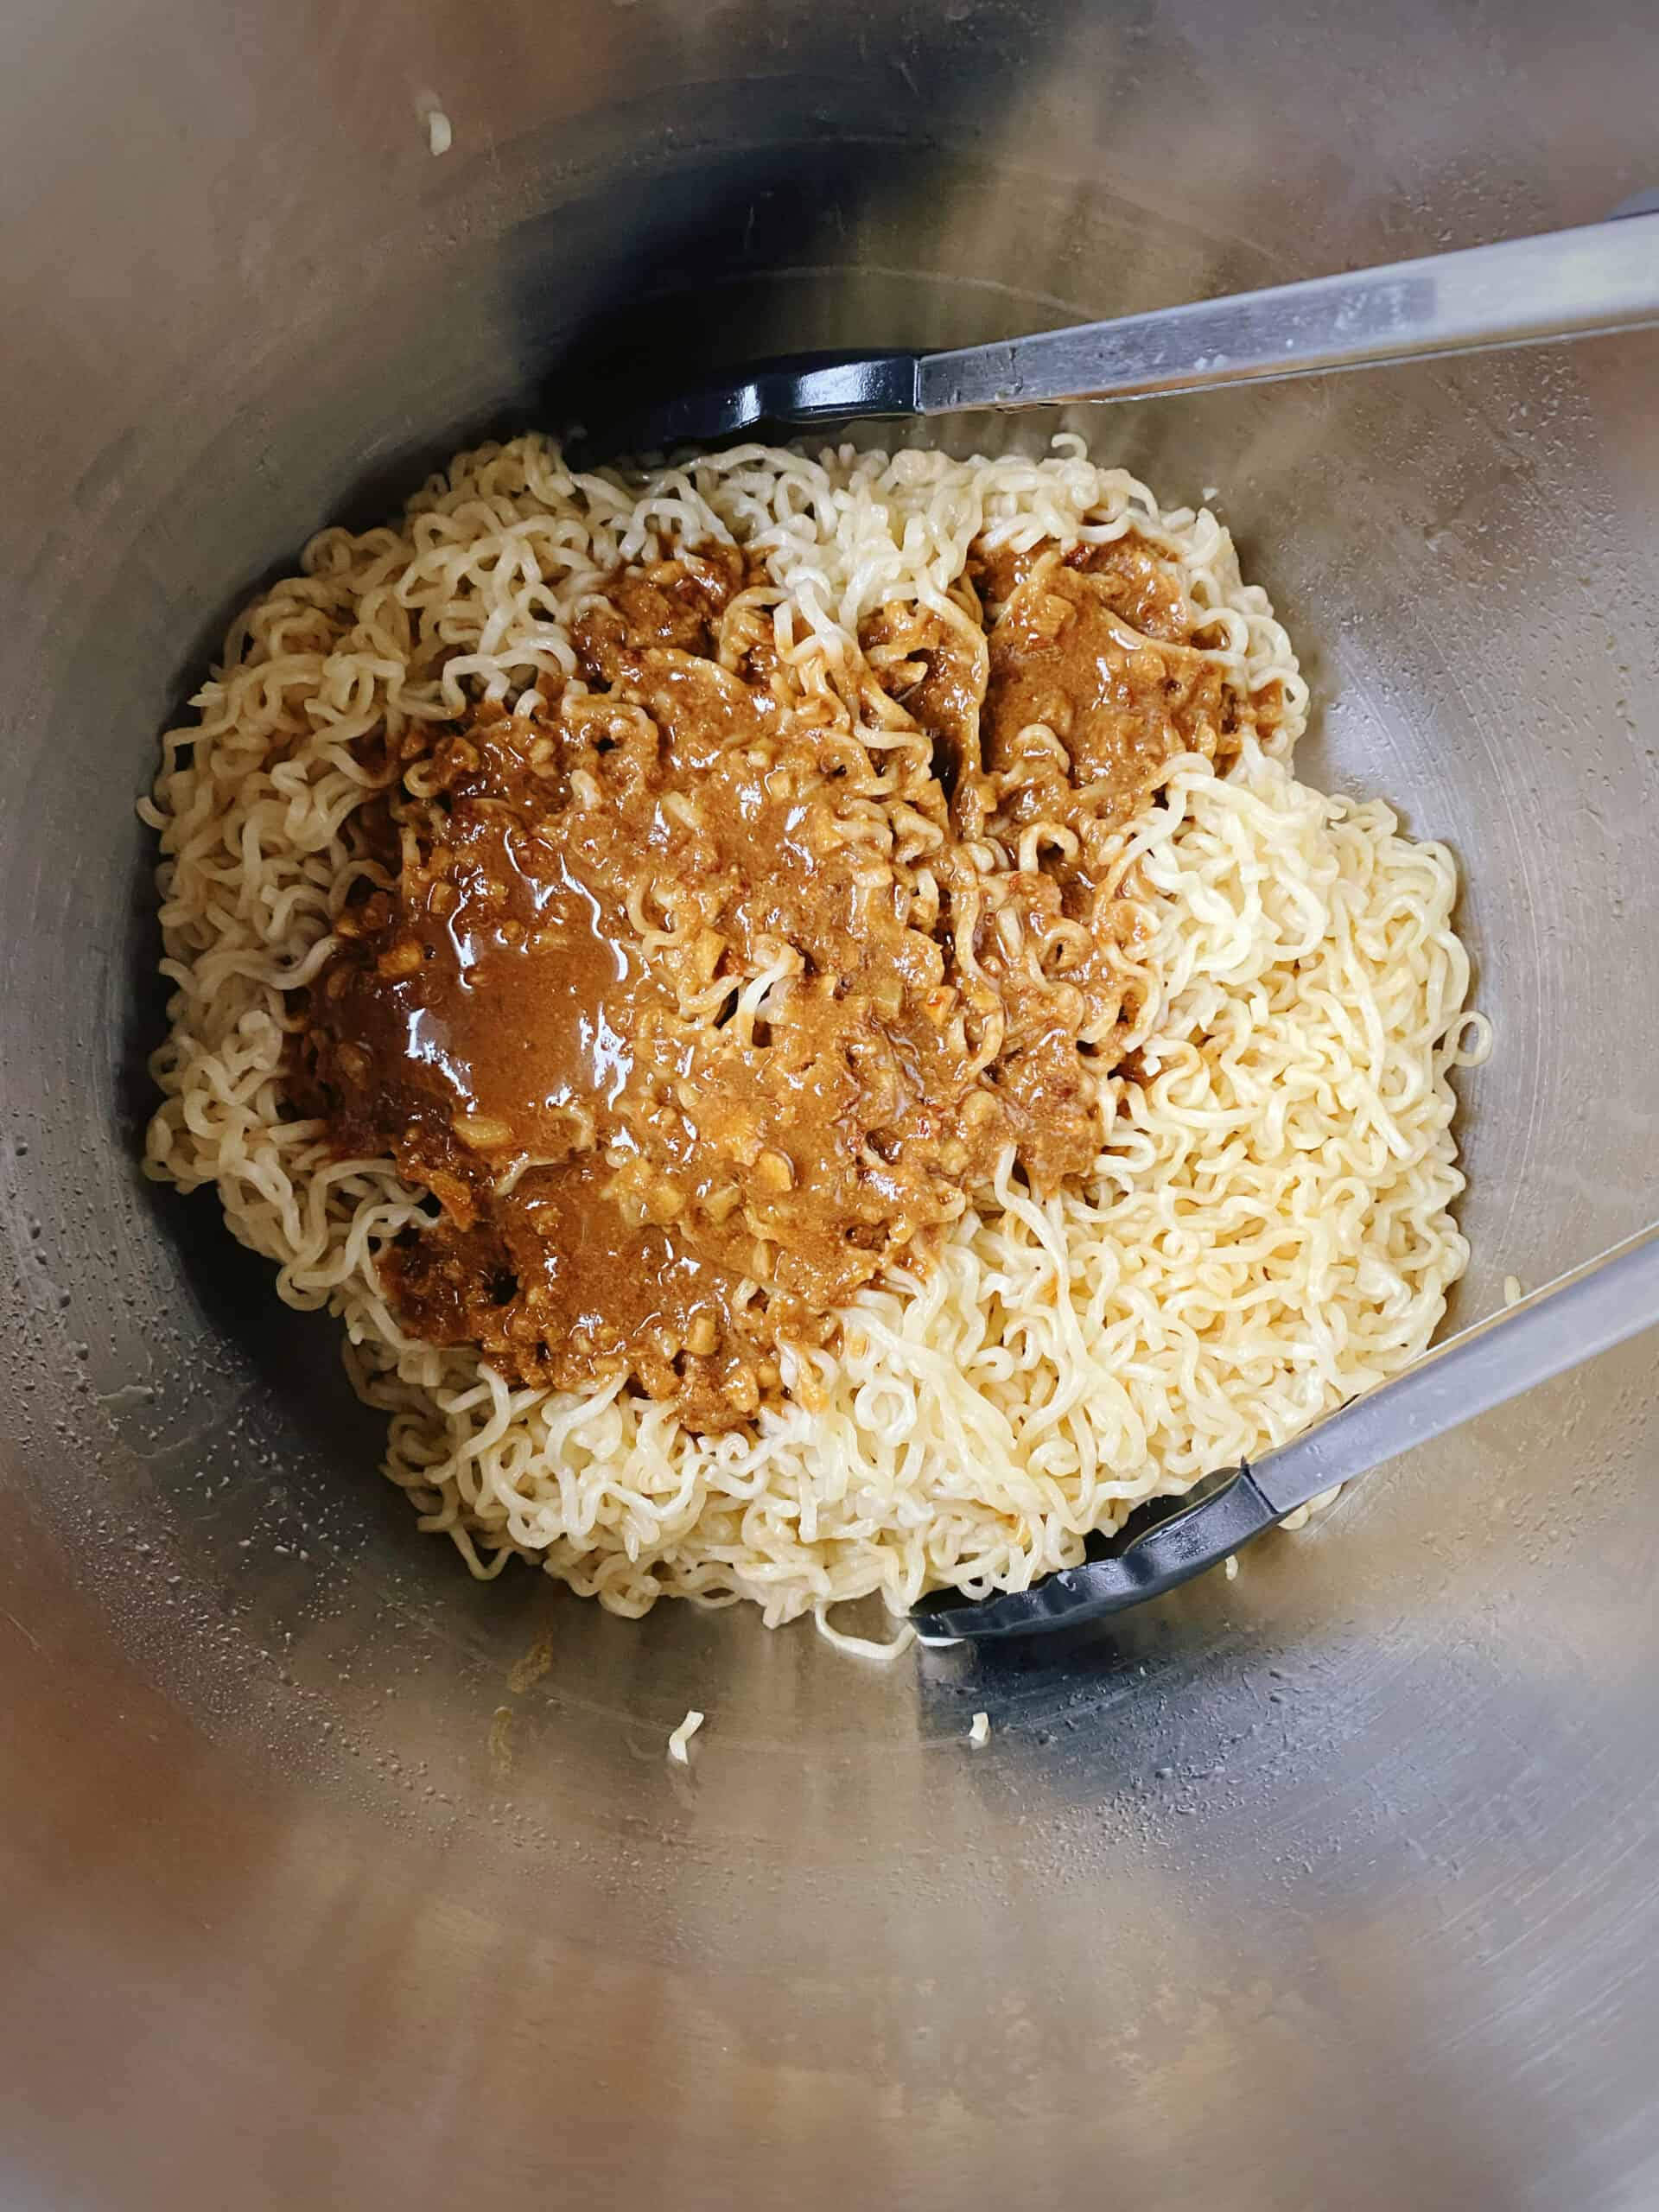 sesame ginger garlic peanut sauce added to drained noodles in the pot.